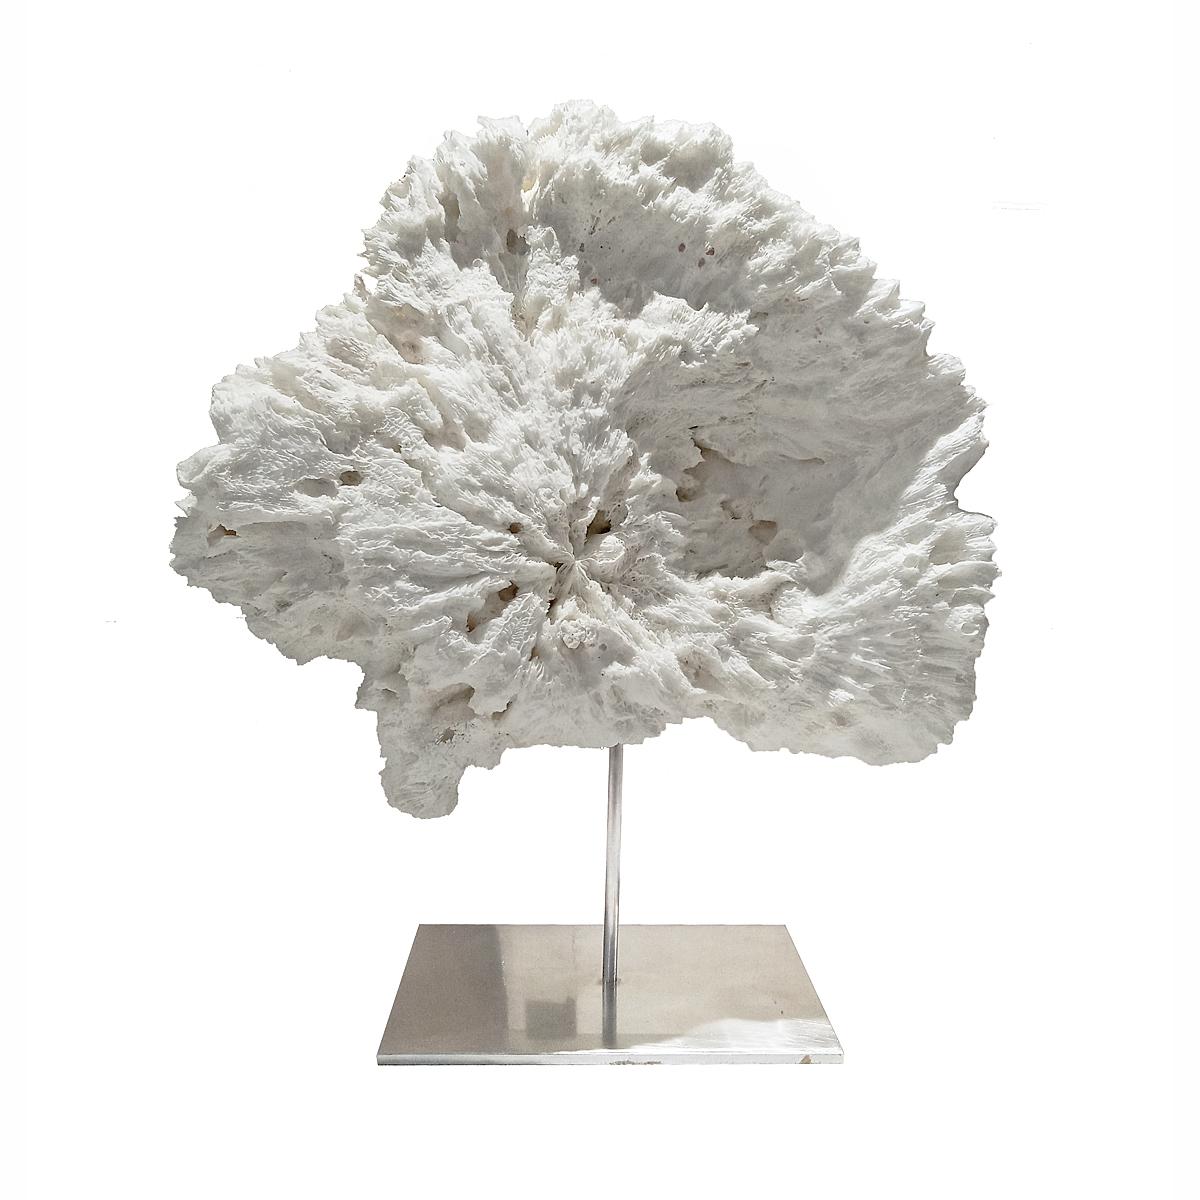 A superb specimen of Cabbage Coral from the South Pacific, with its distinctive form, organic texture, and naturally bleached white color. Mounted on a stainless steel stand. 

19.25